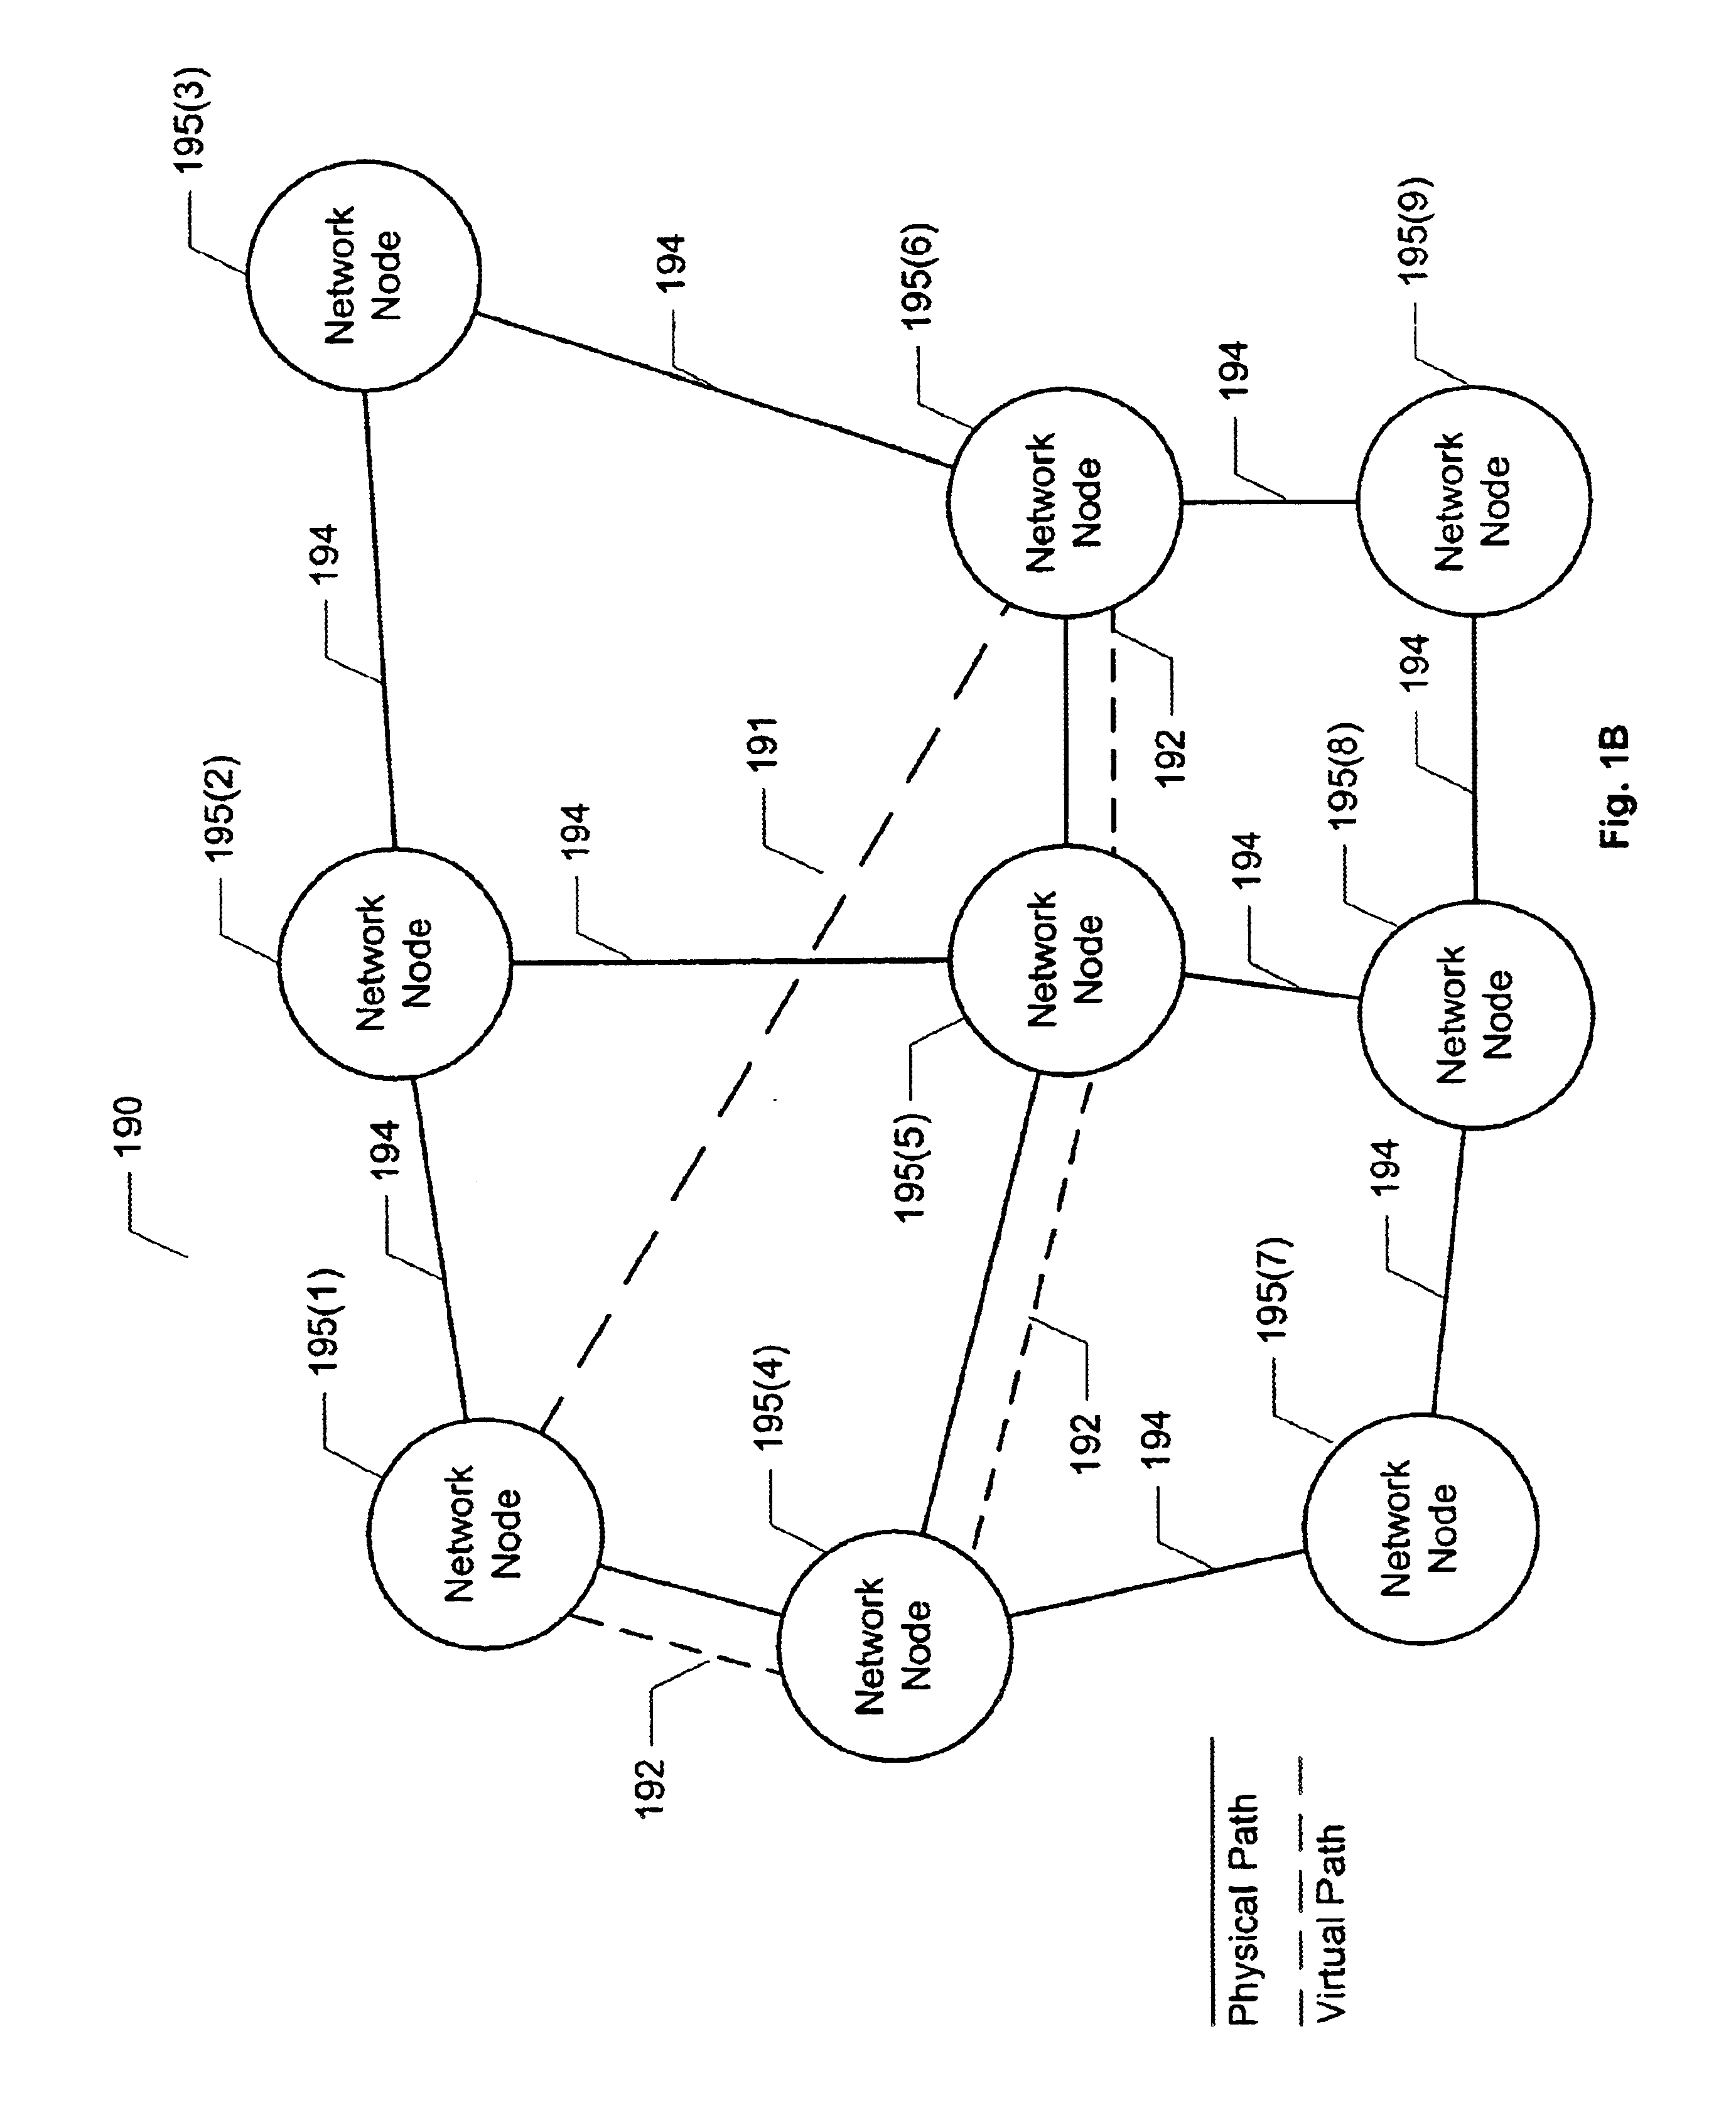 Method and apparatus for isolating faults in a switching matrix